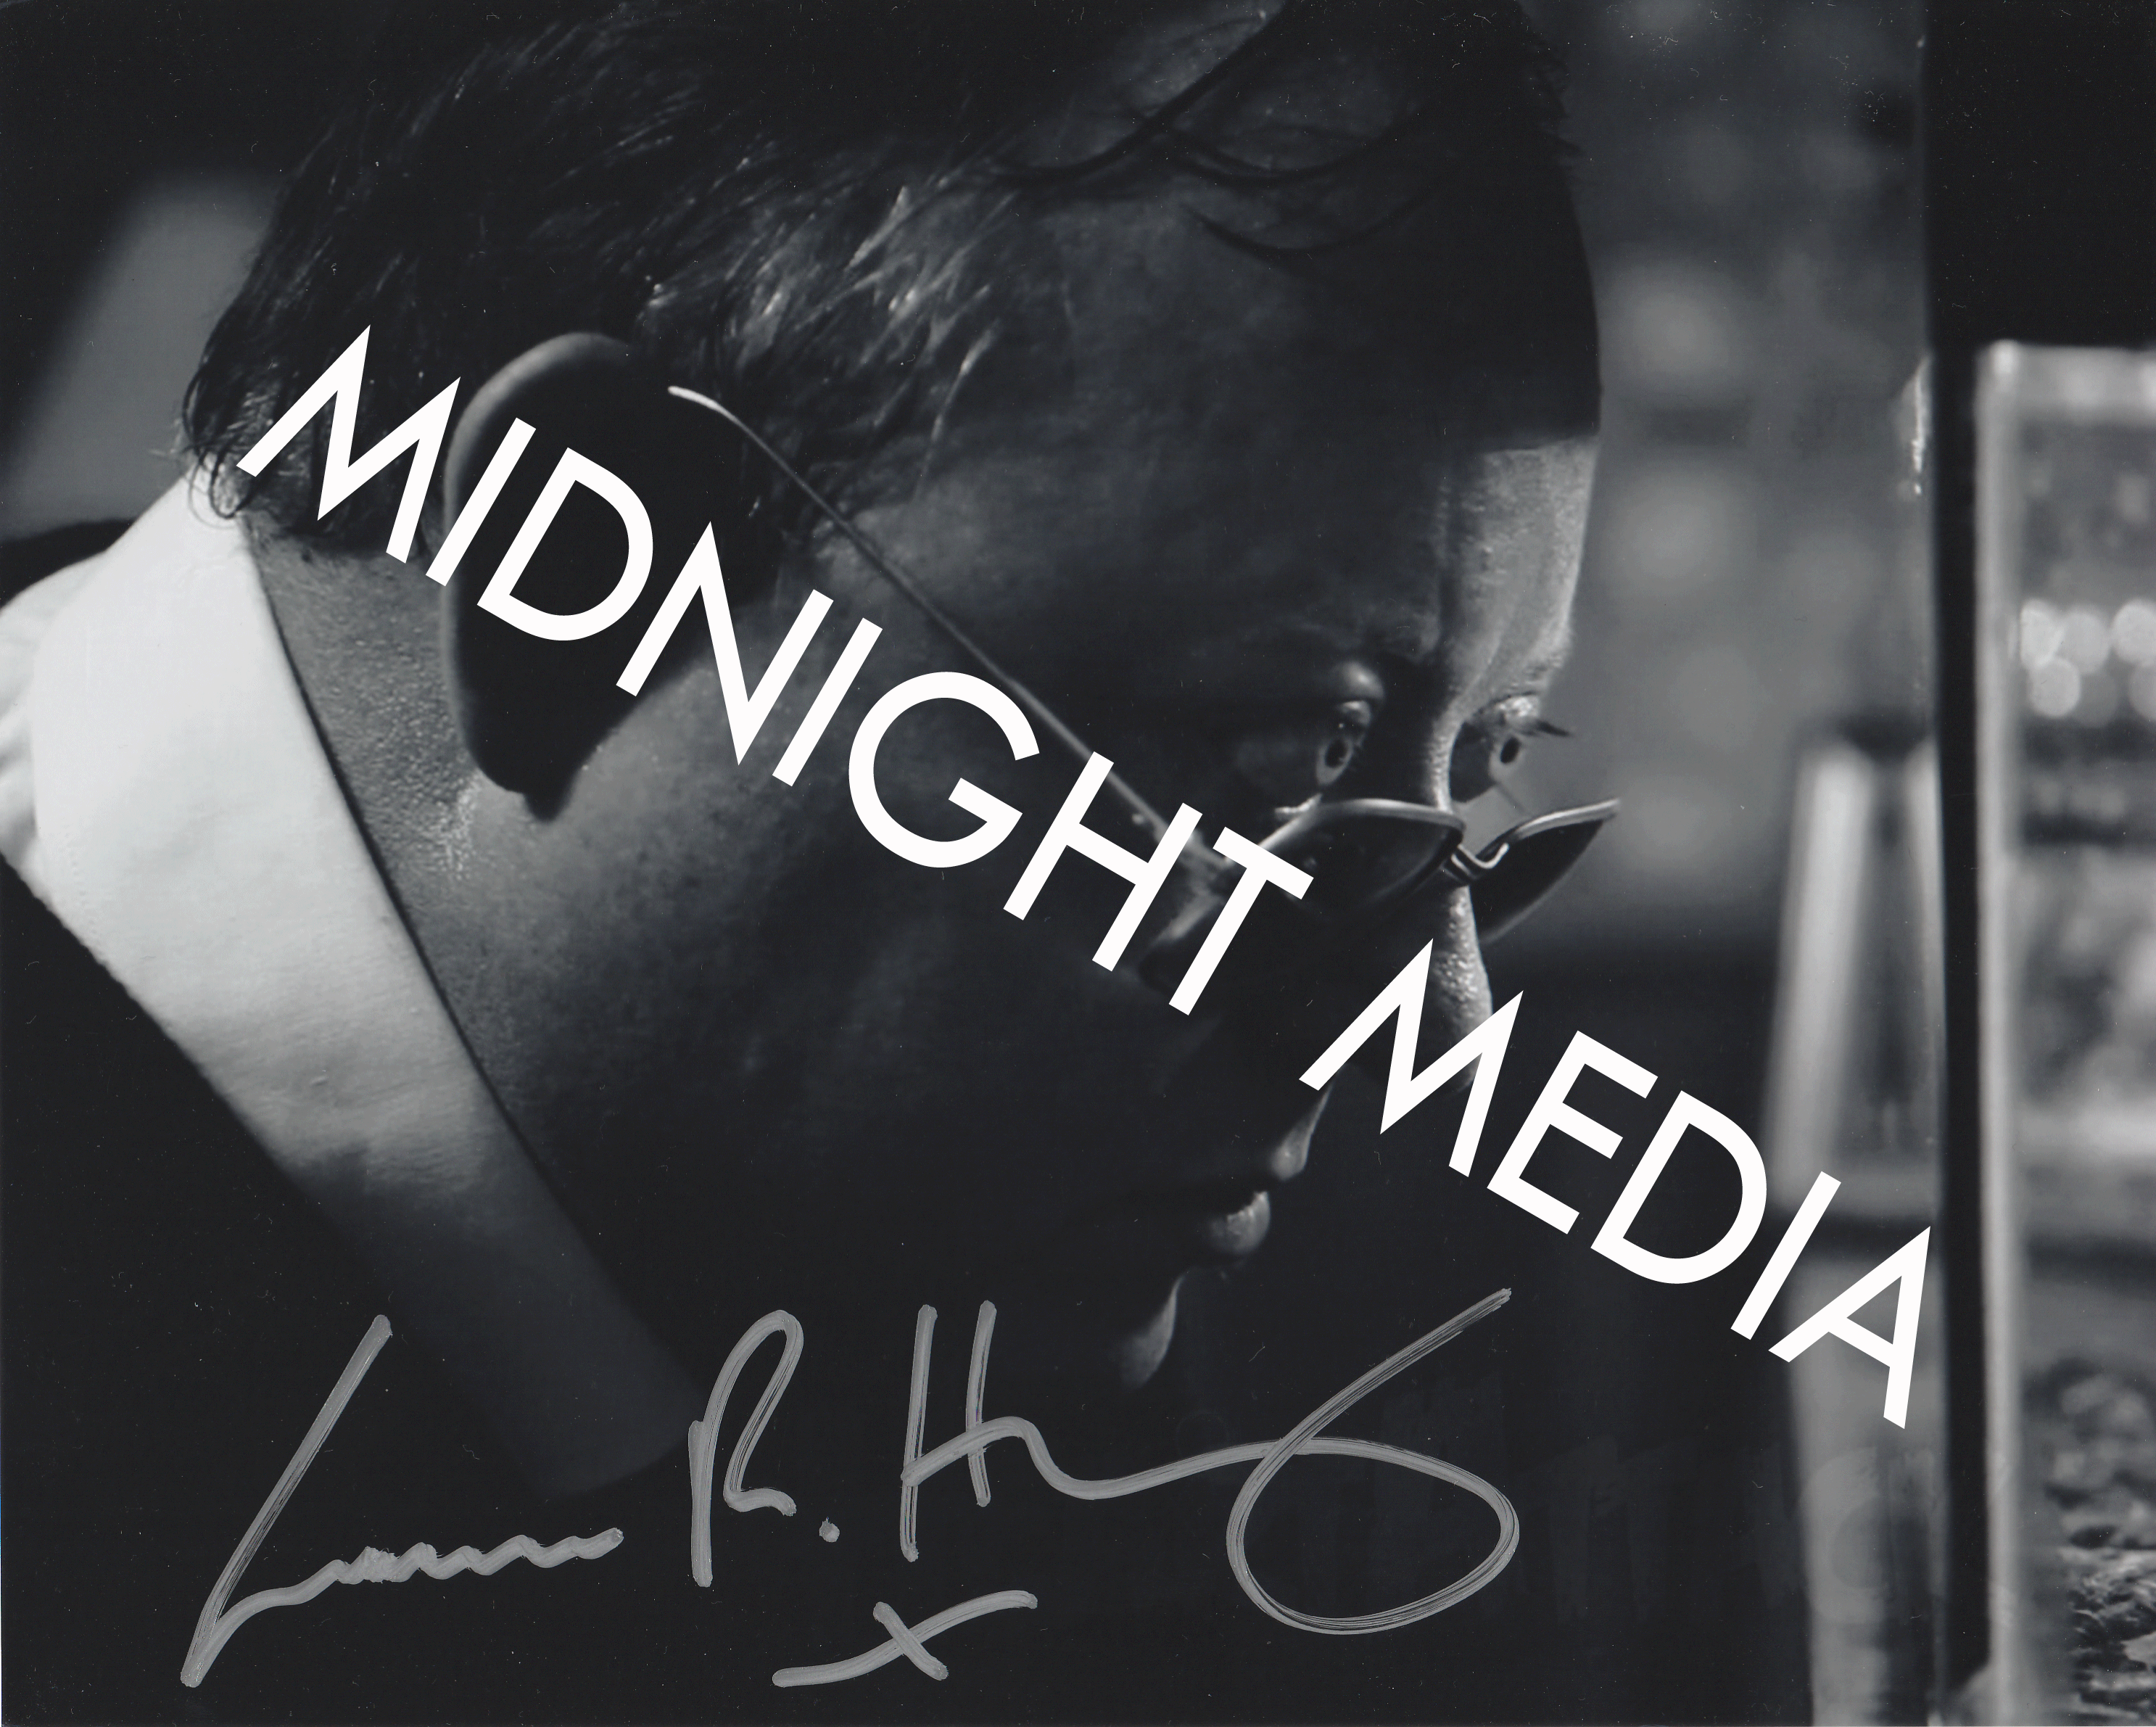 LAWRENCE R. HARVEY SIGNED PHOTOGRAPH - HUMAN CENTIPEDE 2 (B)